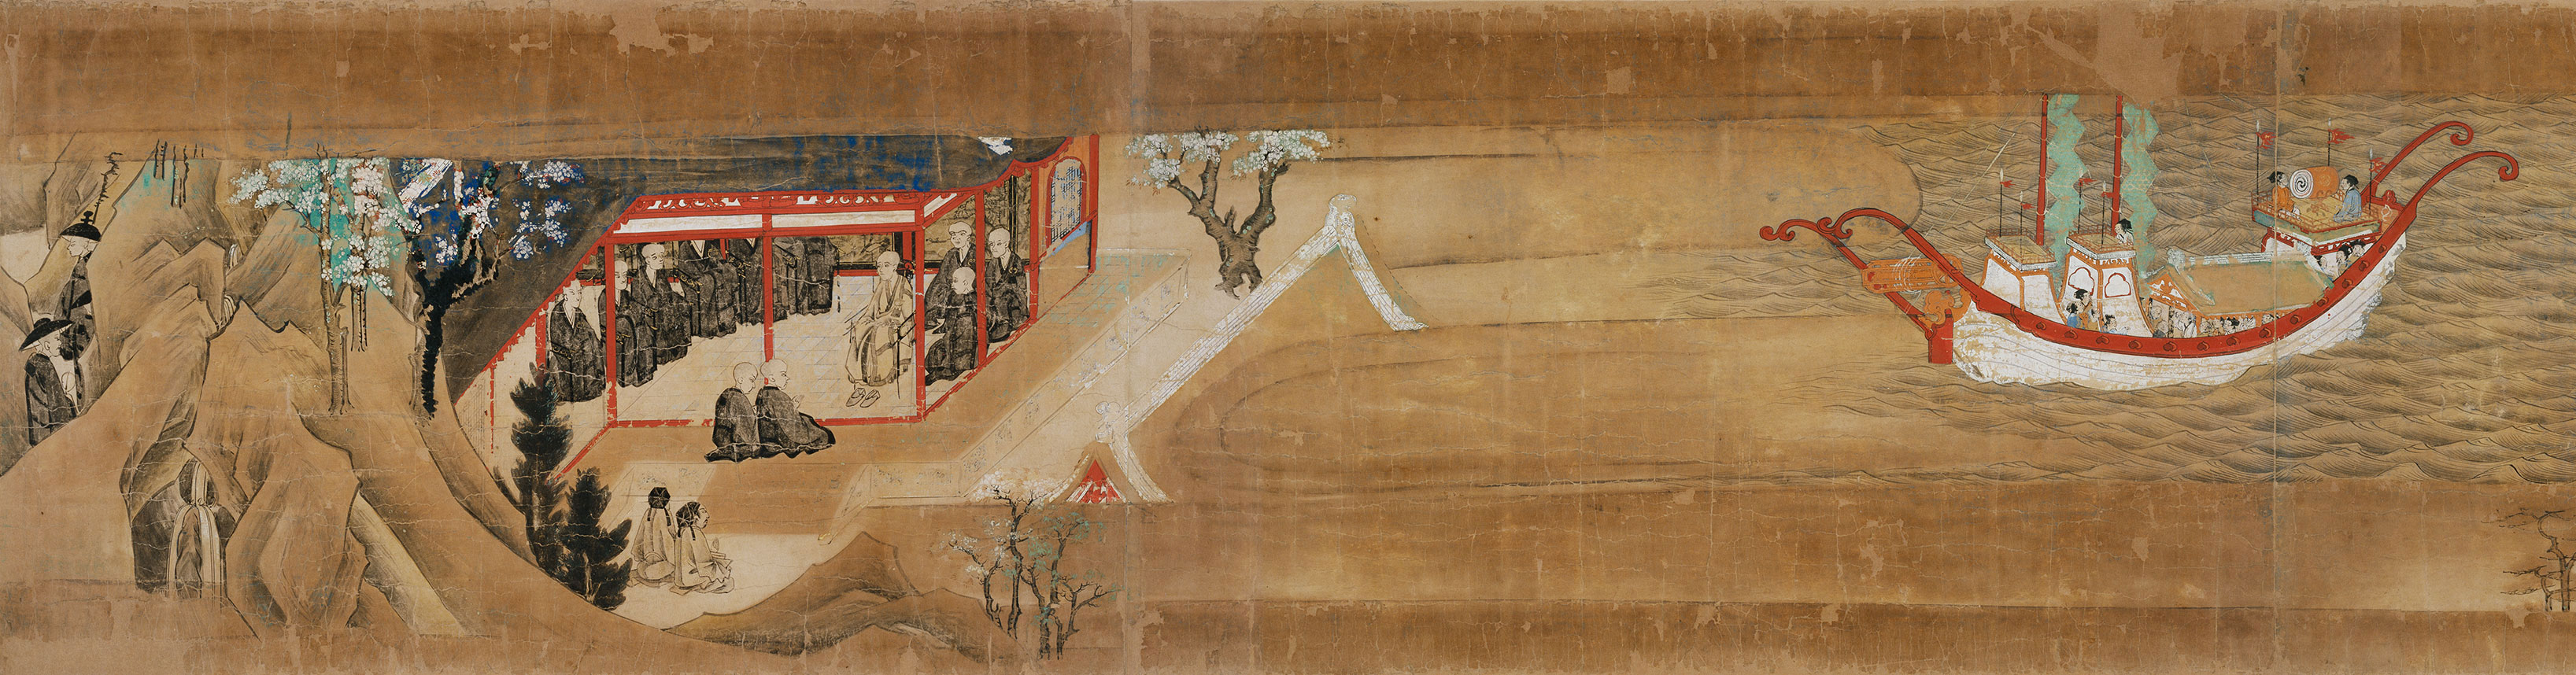 Important Cultural Property Toseiden emaki (Illustrated Scrolls of Ganjin-Wajo’s expedition to Japan), Volume 1